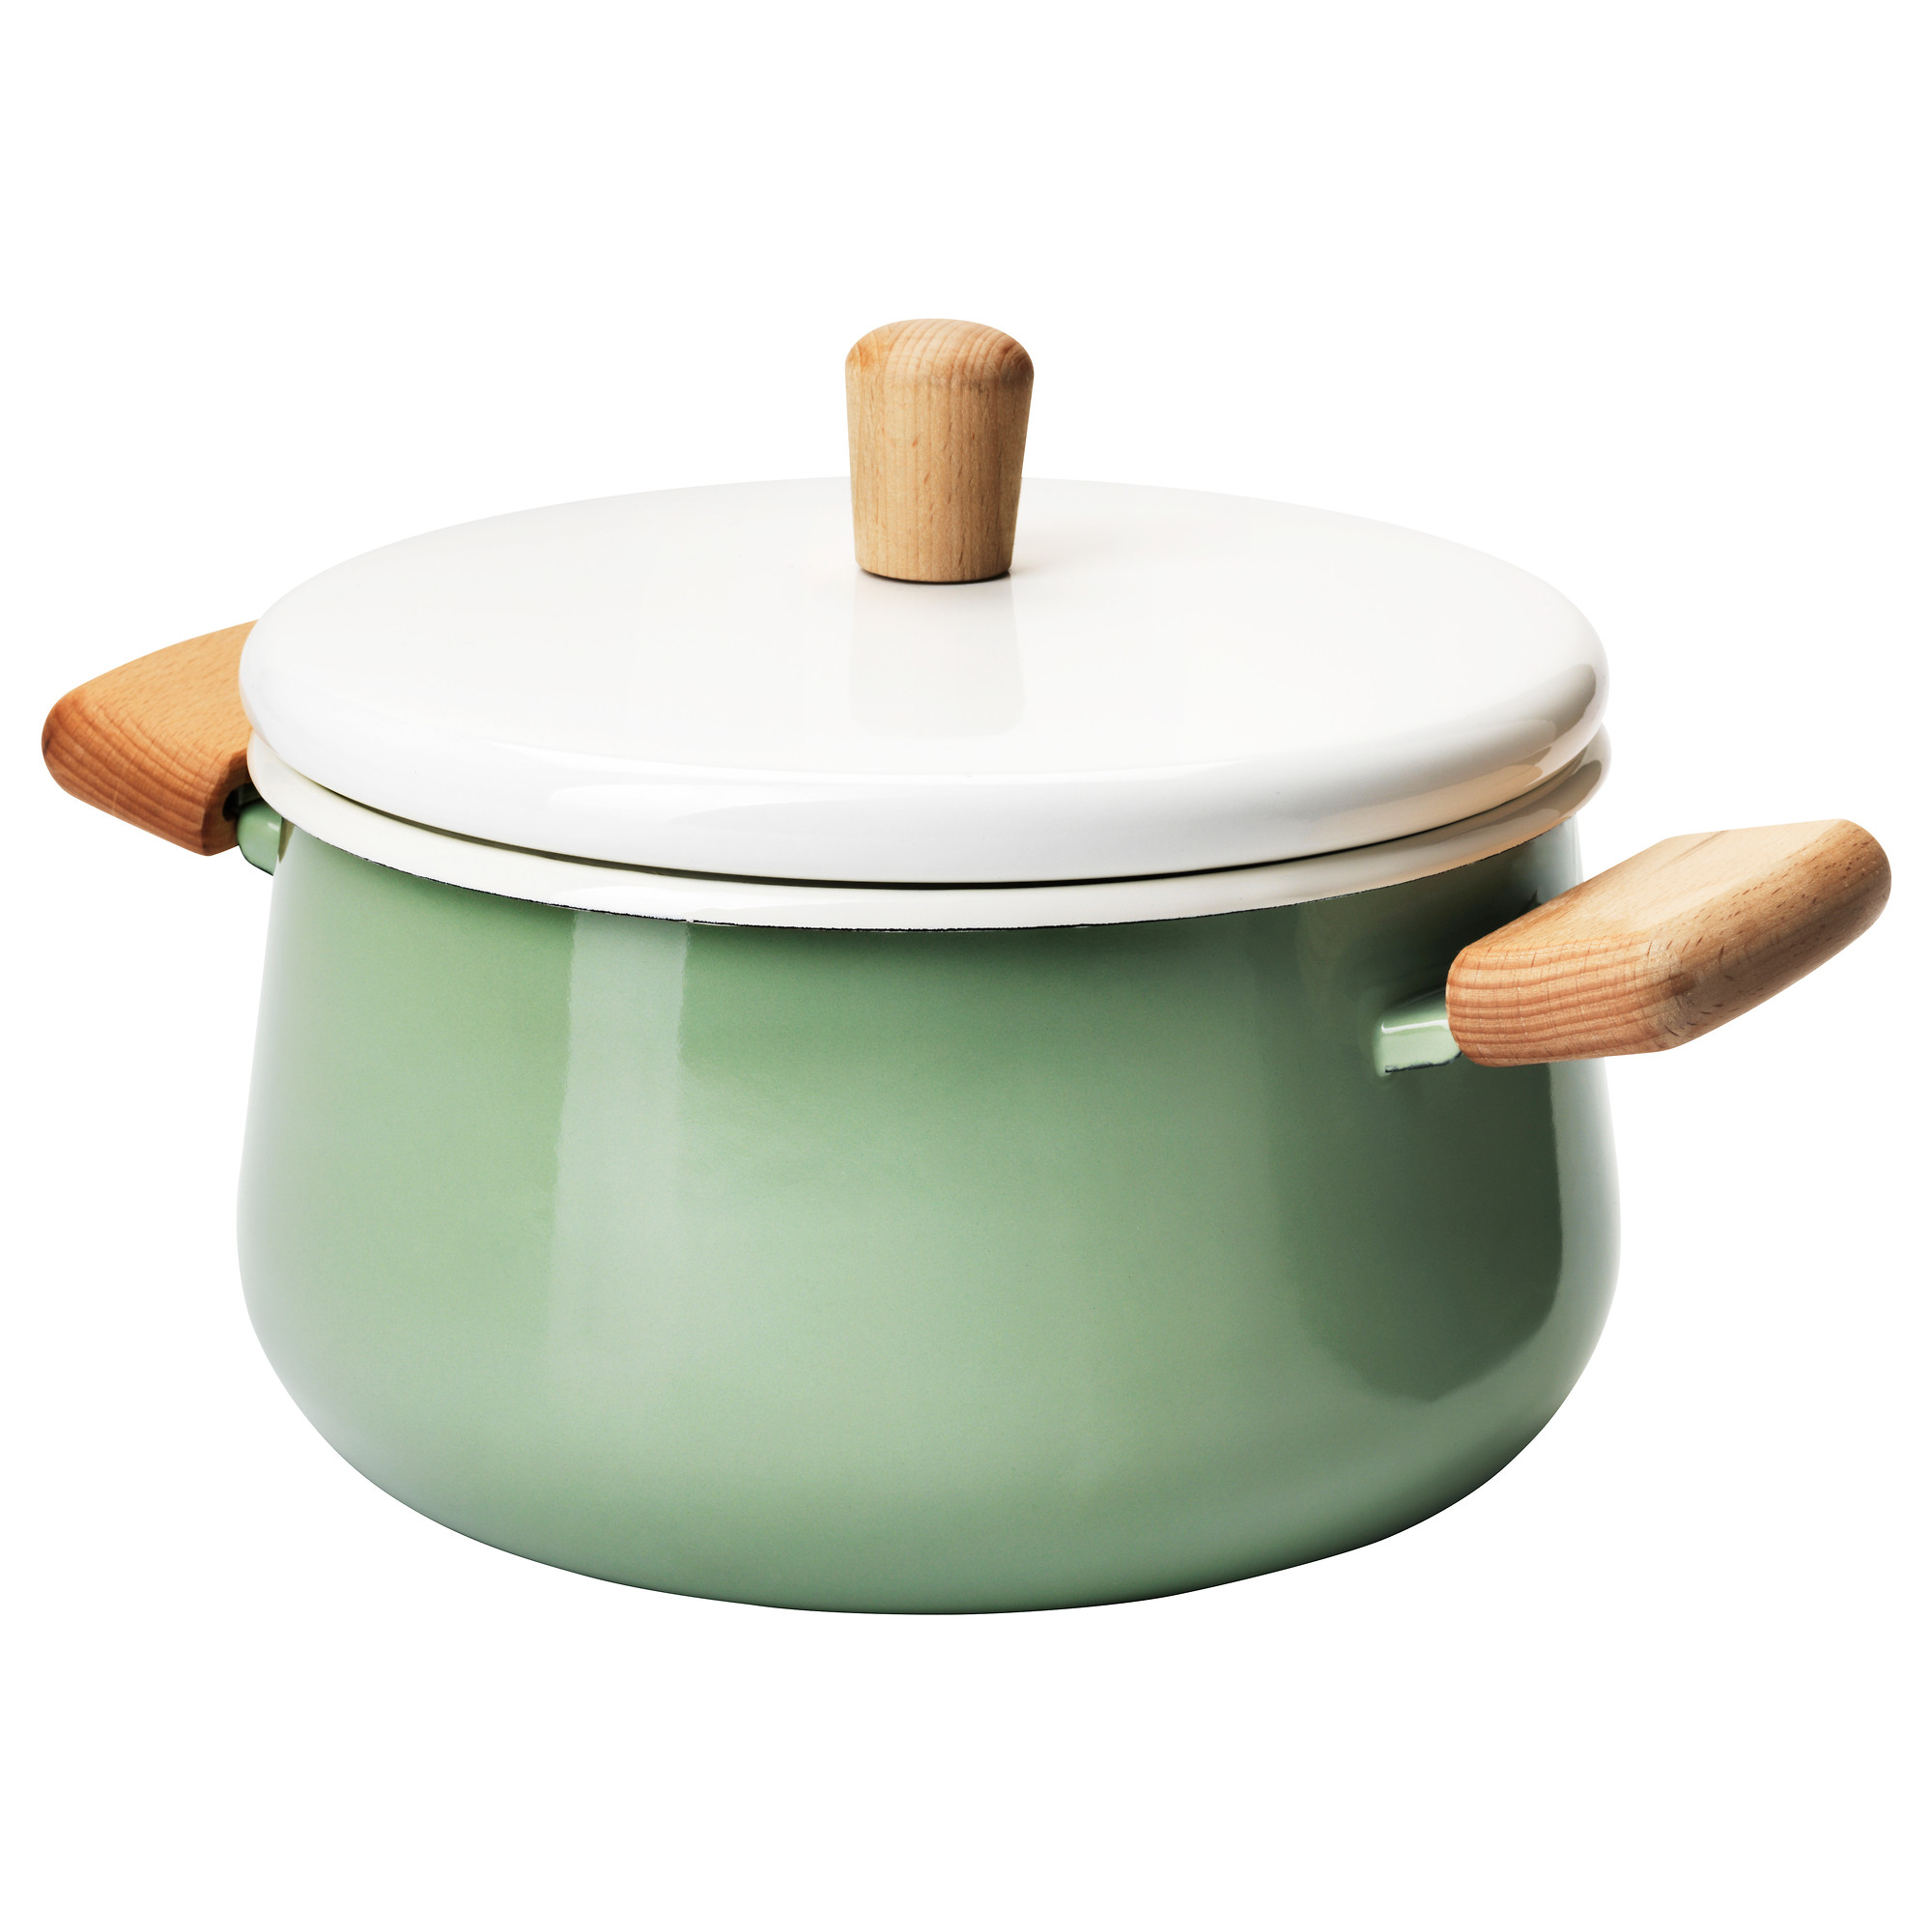 KASTRULL pot with lid